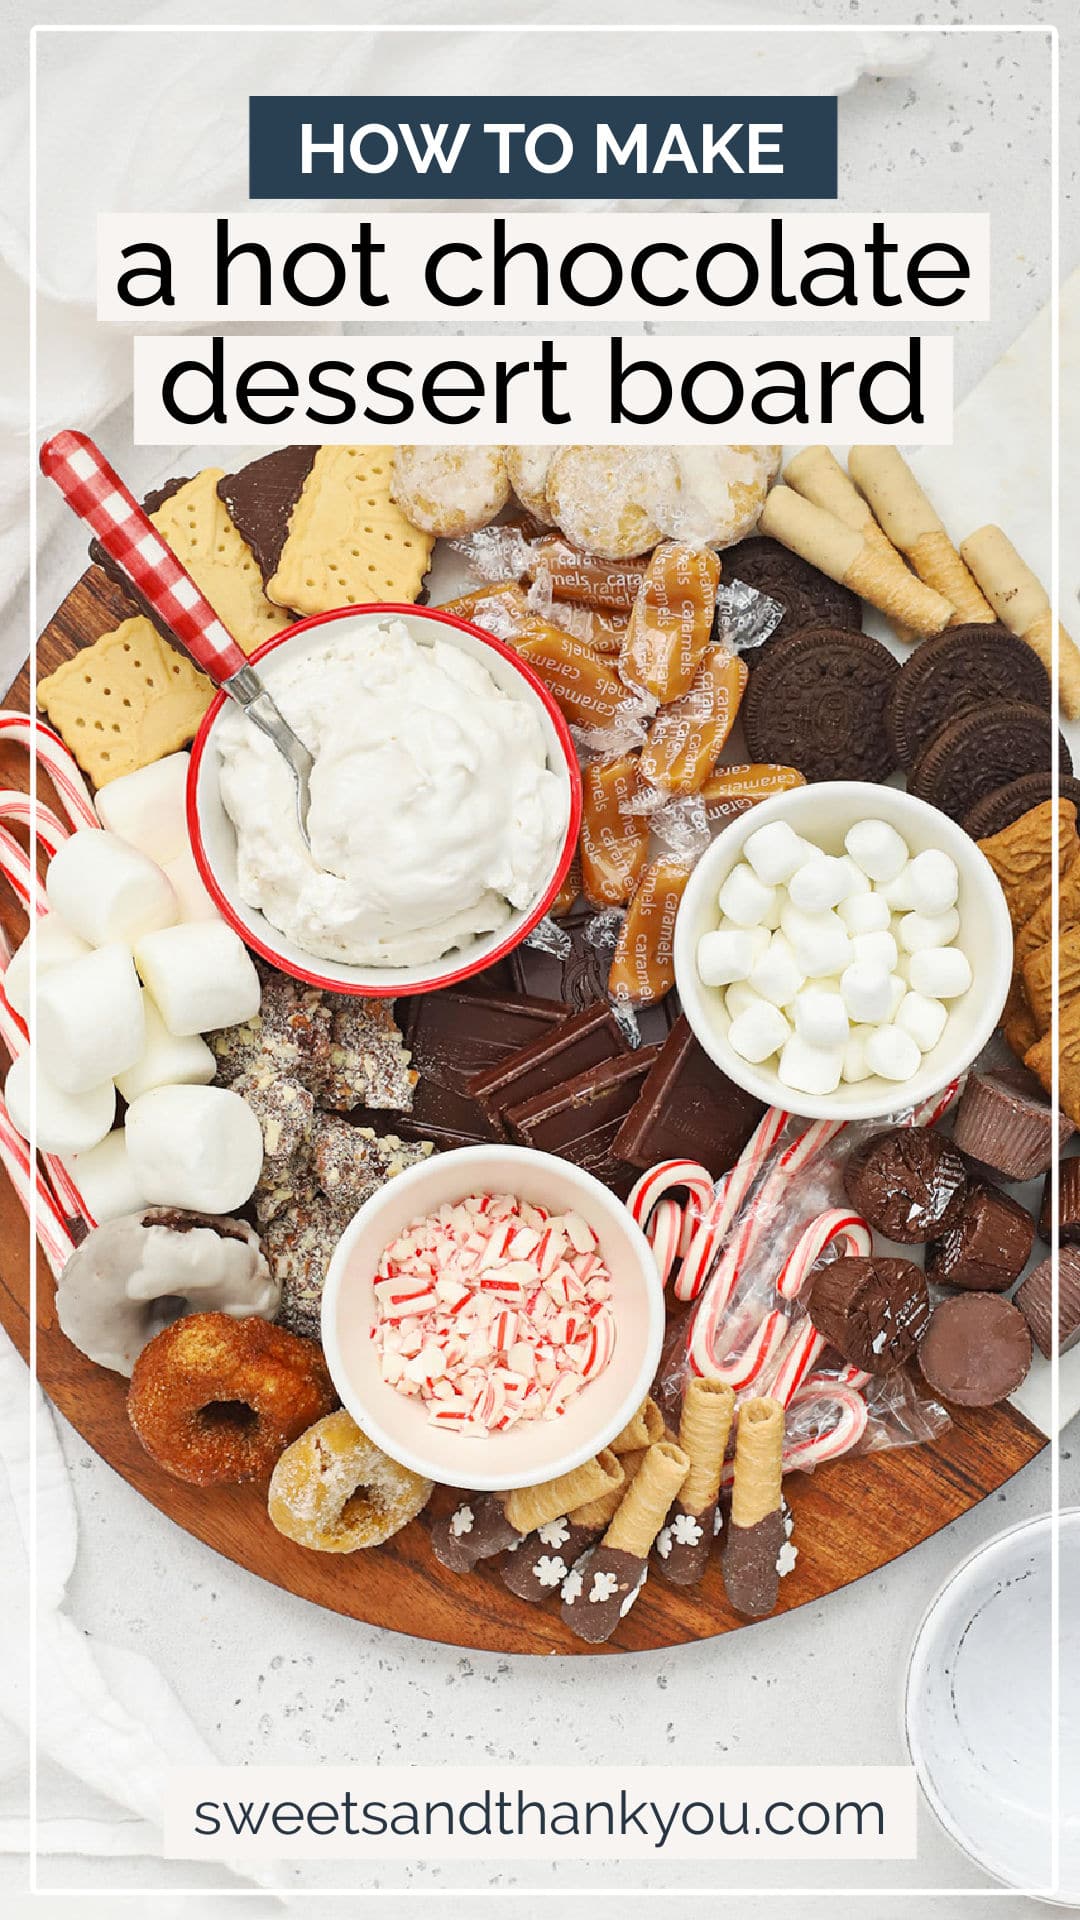 How To Make a Gluten-Free Hot Chocolate Board - Build a gluten-free hot chocolate "charcuterie" board with fun hot chocolate toppings, mix-ins & more! // Hot Chocolate Toppings // Vegan Hot Chocolate // Gluten-Free Charcuterie Board // Gluten-Free Hot Chocolate // Gluten-Free Snack Board // Gluten-free party ideas // Gluten-Free Hot Chocolate Bar // Gluten-Free Holiday Party // Chocolate Charcuterie // Dessert Charcuterie Board